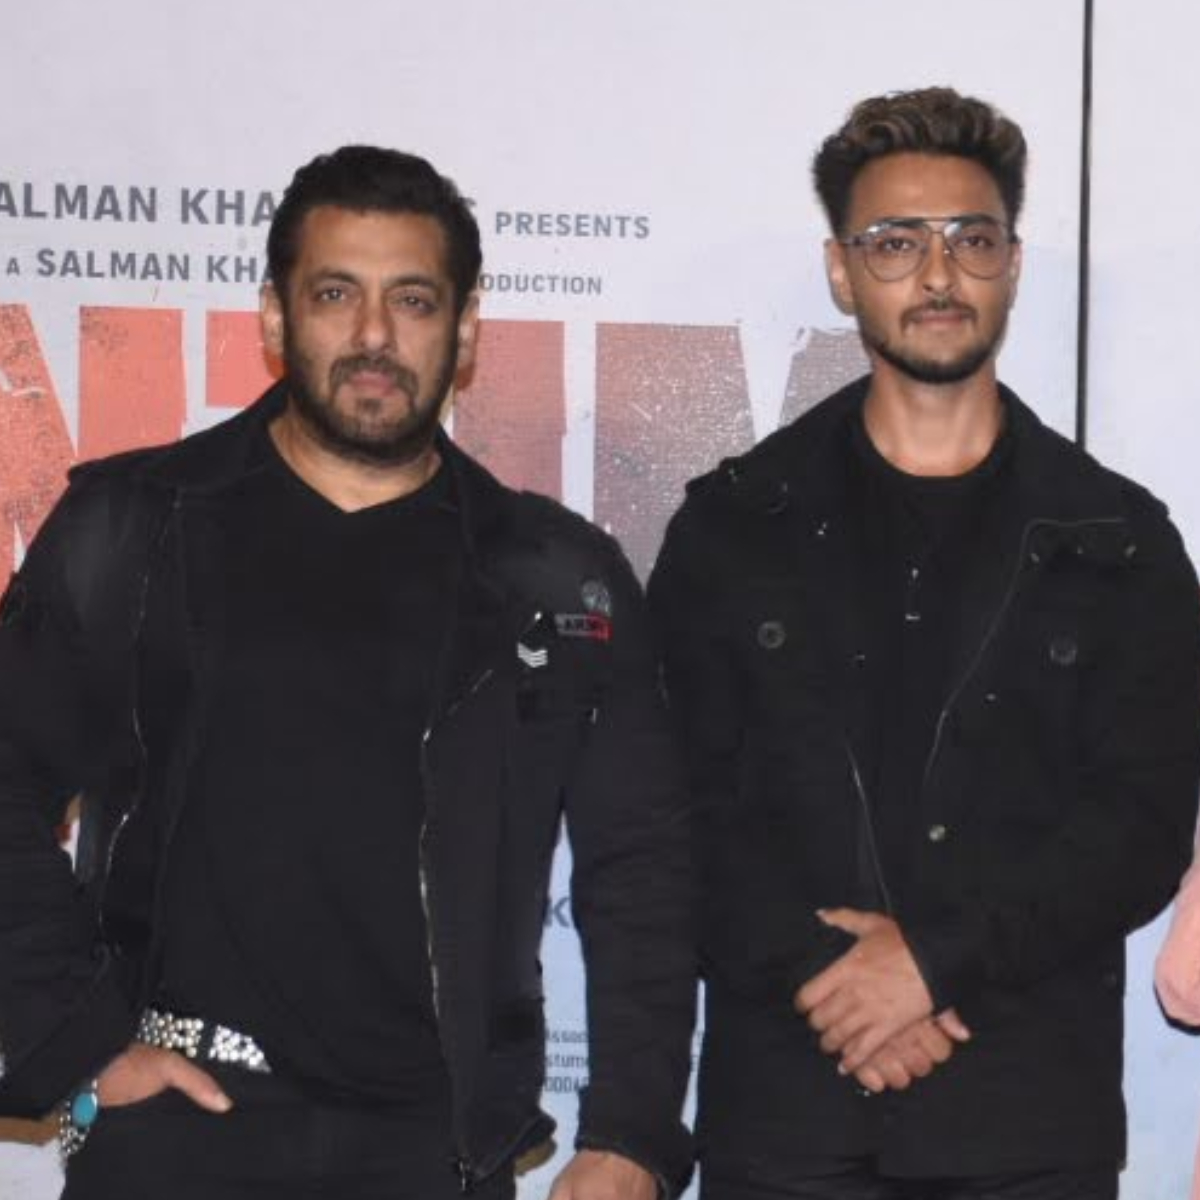 EXCLUSIVE: Salman Khan & Aayush Sharma’s Antim to release on 3200 screens in India; Show sharing with SMJ 2